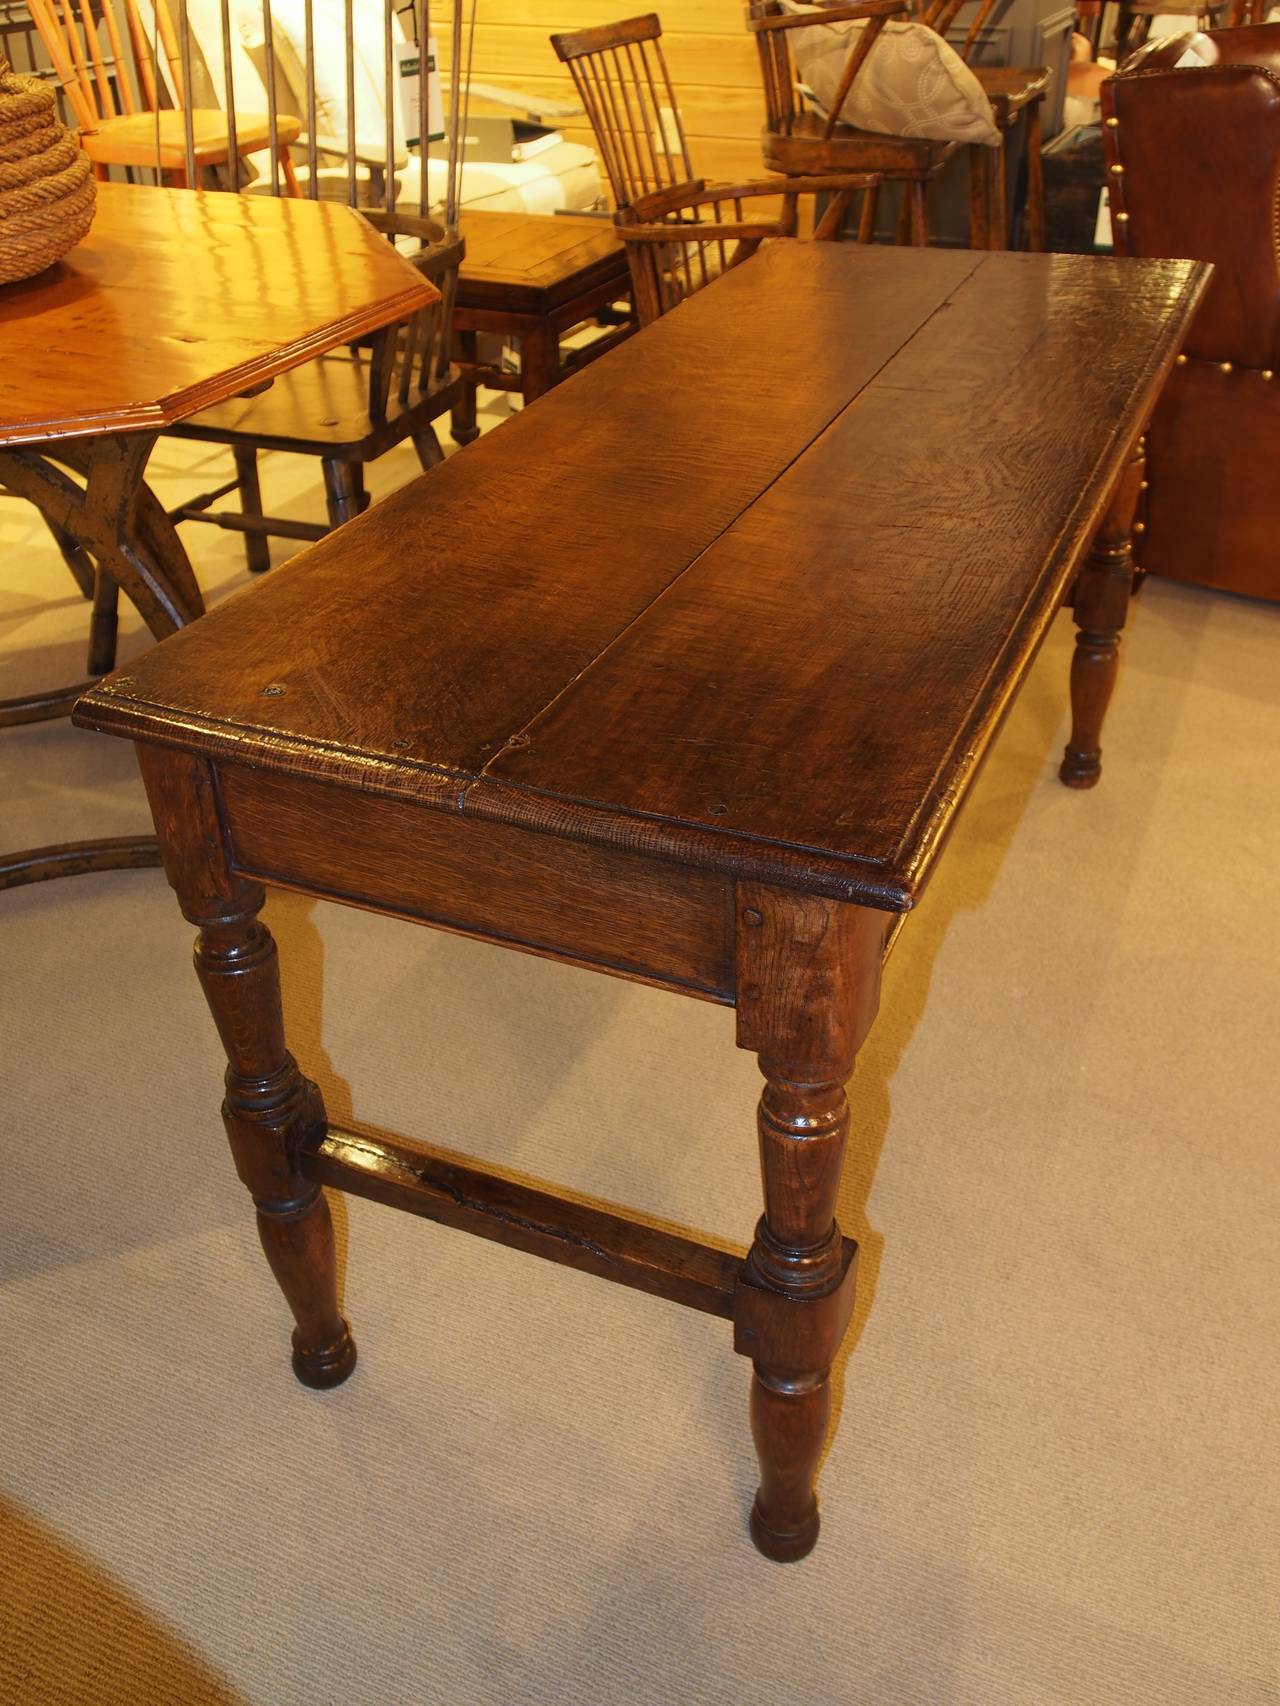 English solid oak console table with carved turning legs.